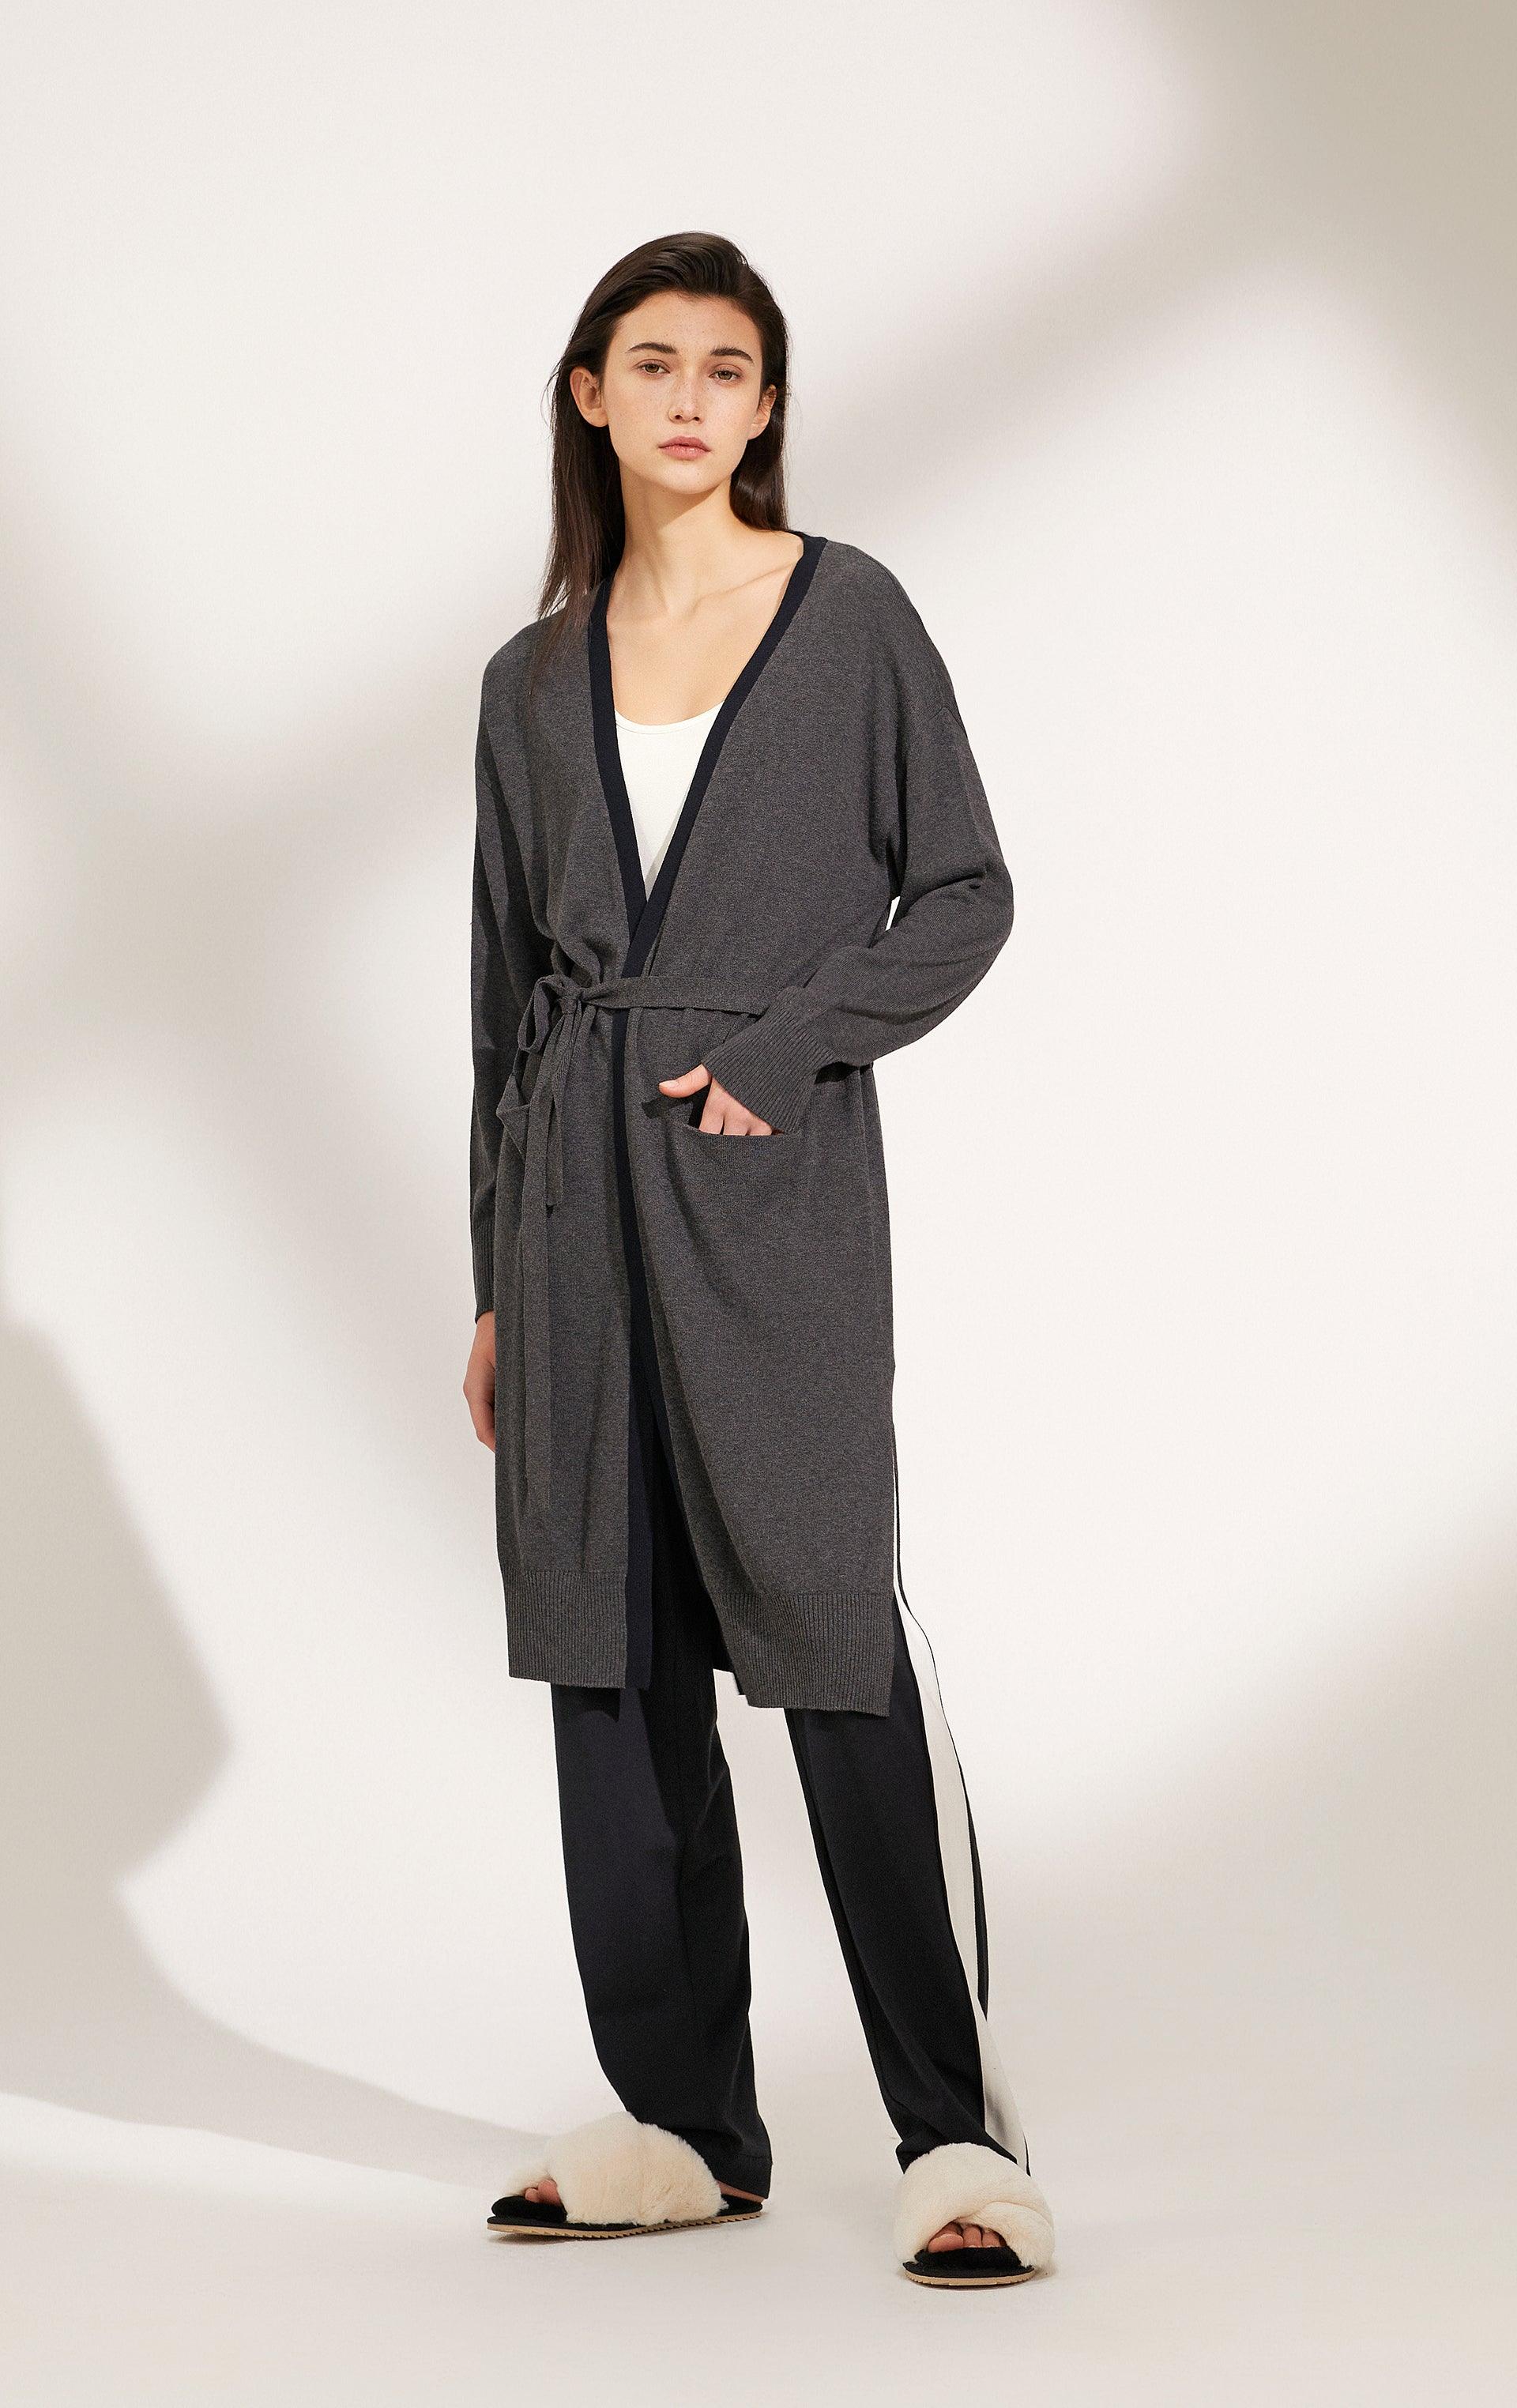 Women's Thick Side Slit Long Cardigan - NOT LABELED